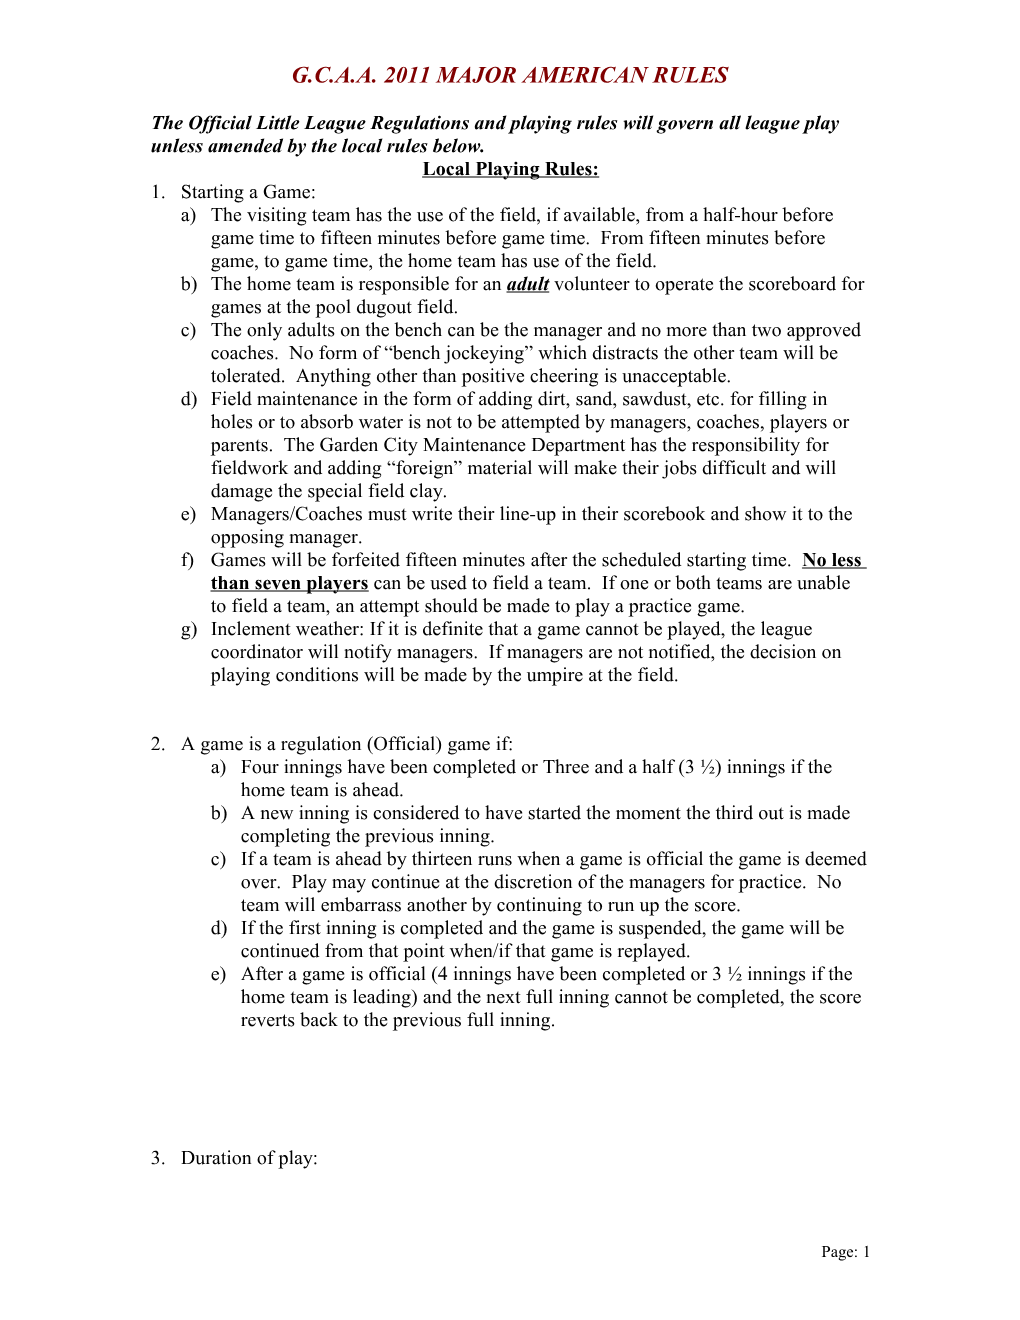 Rules for 1999 Draft